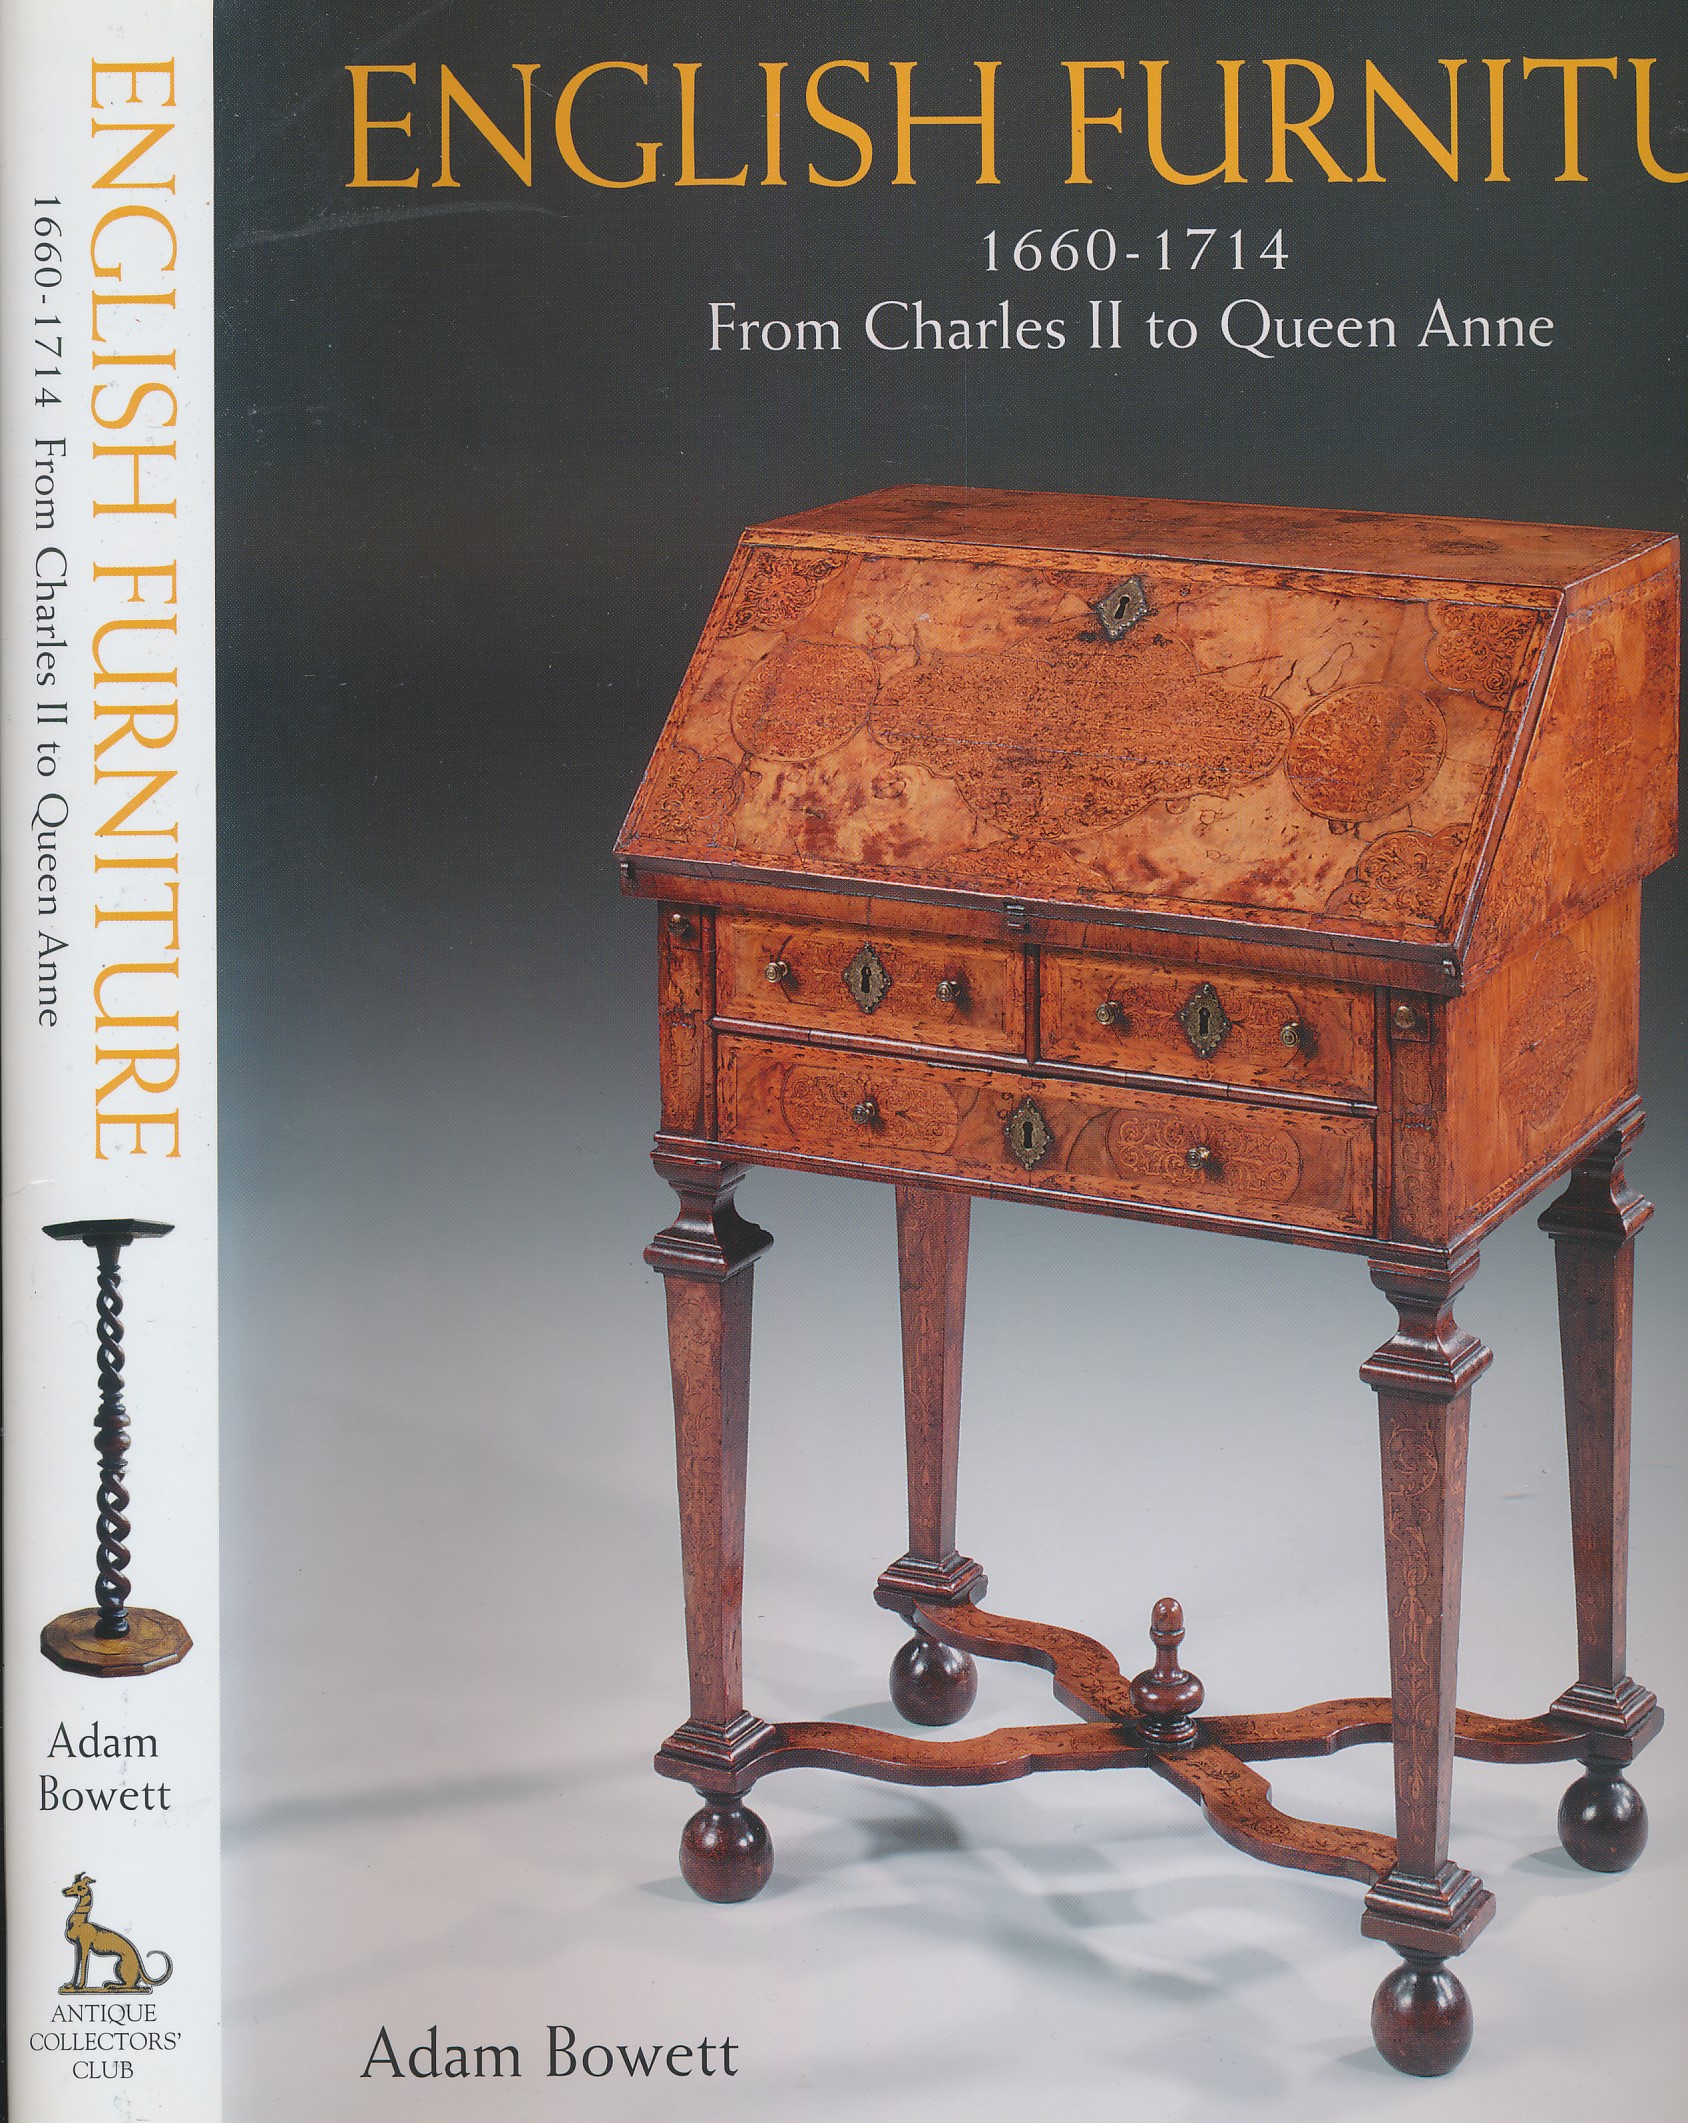 English Furniture 1660 - 1714 From Charles II to Queen Anne